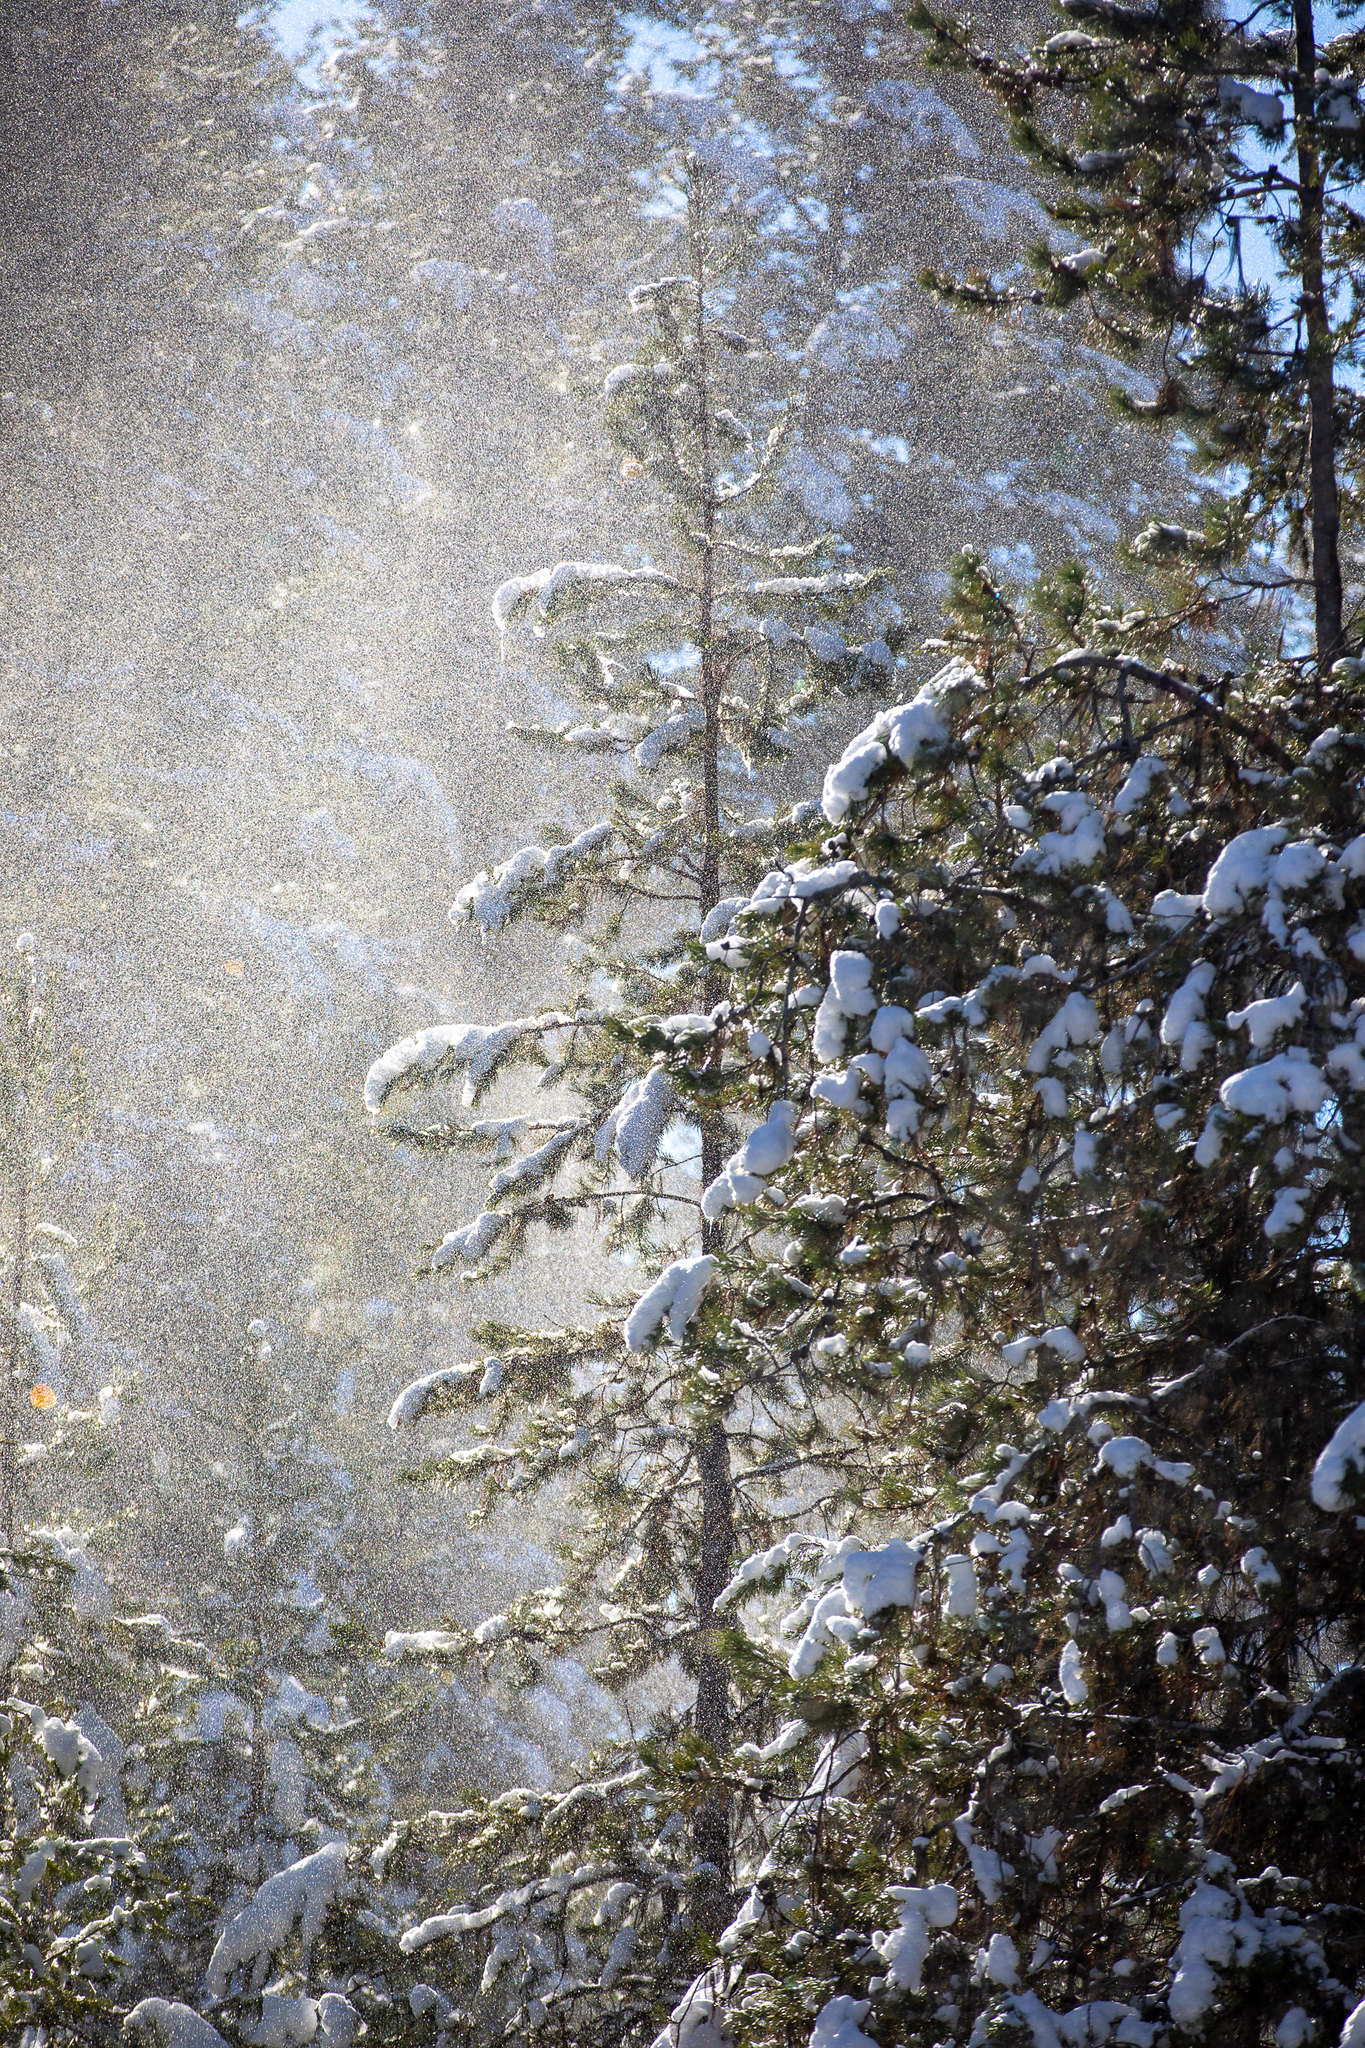 pine trees covered in snow in the Boise National Forest